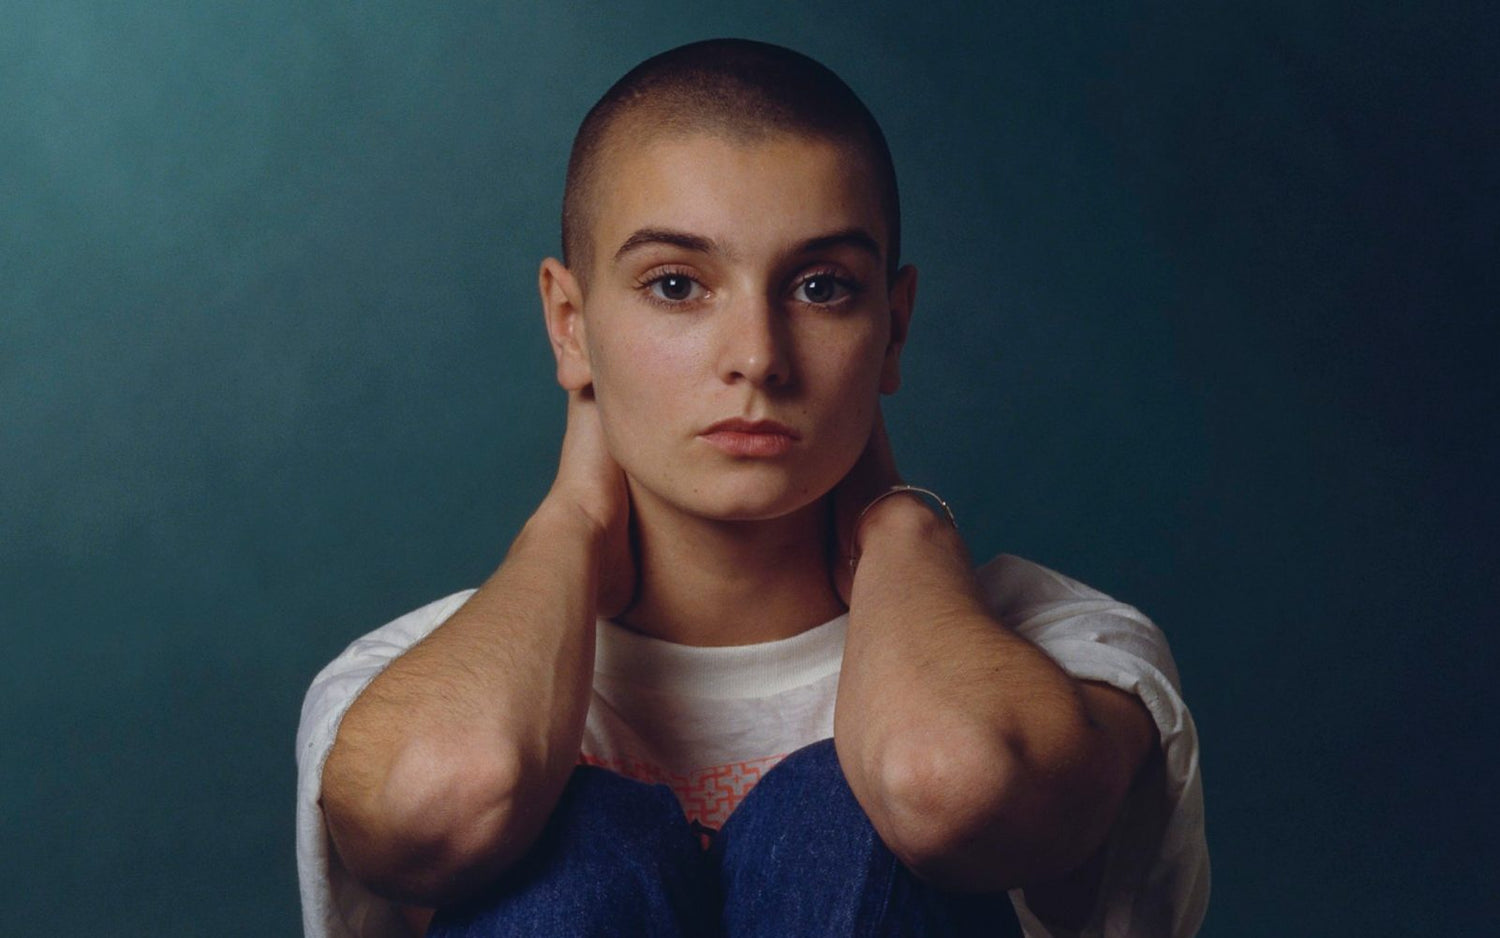 SINEAD O’CONNOR HAS PASSED AWAY